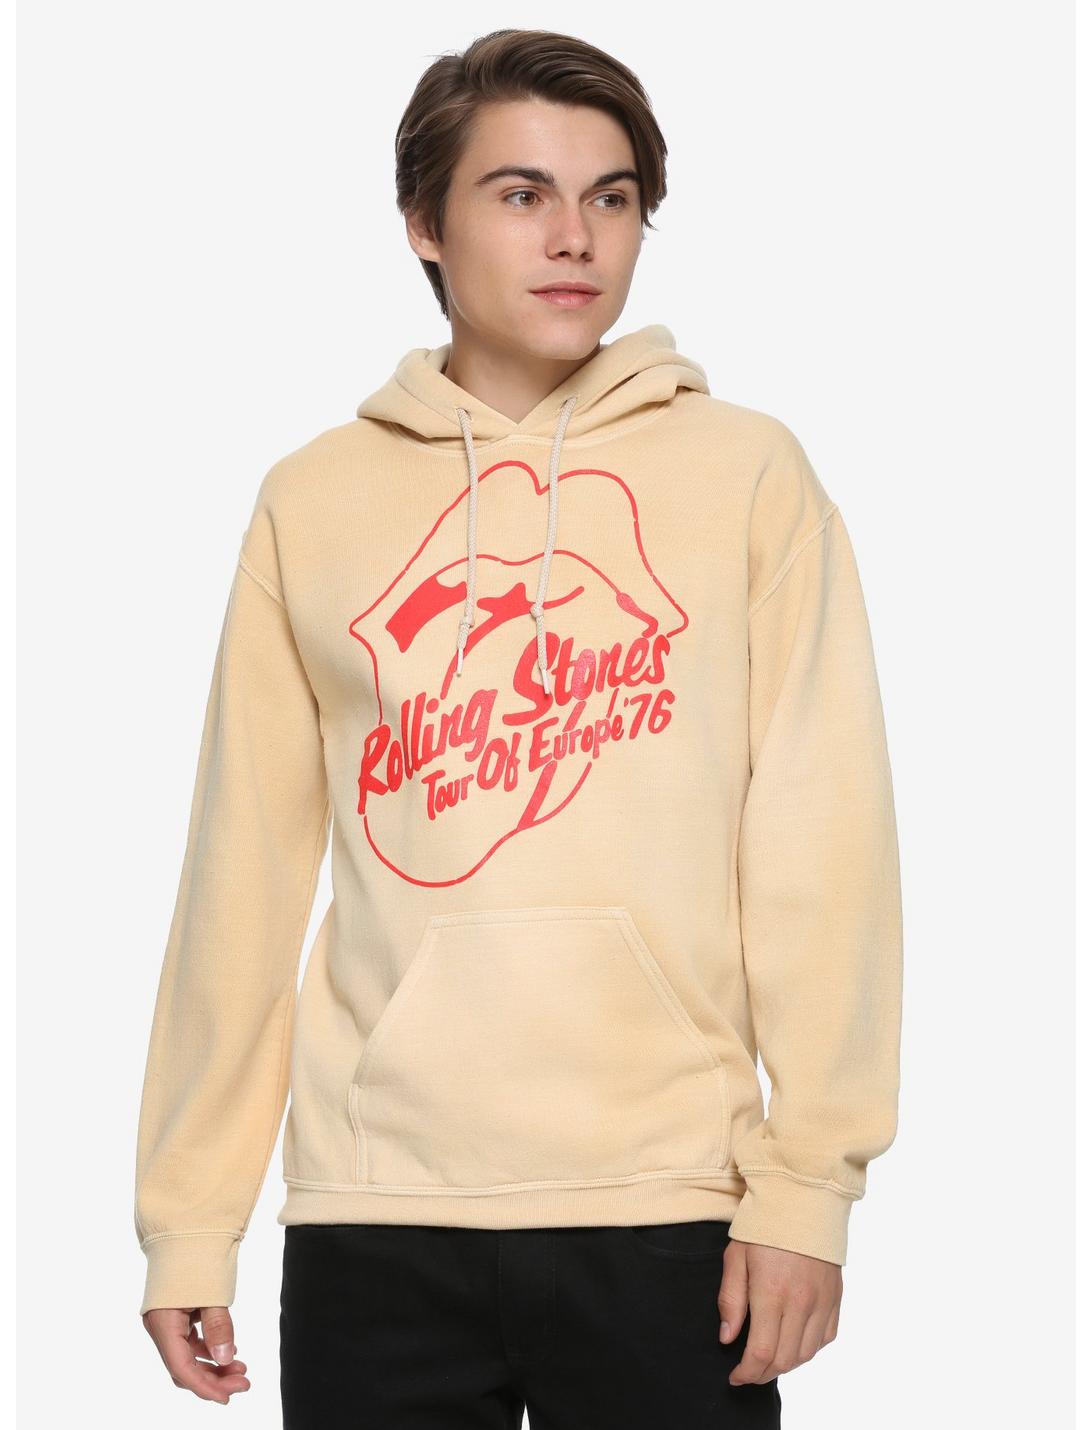 The Rolling Stones Tour Of Europe 76 Hoodie, YELLOW, hi-res